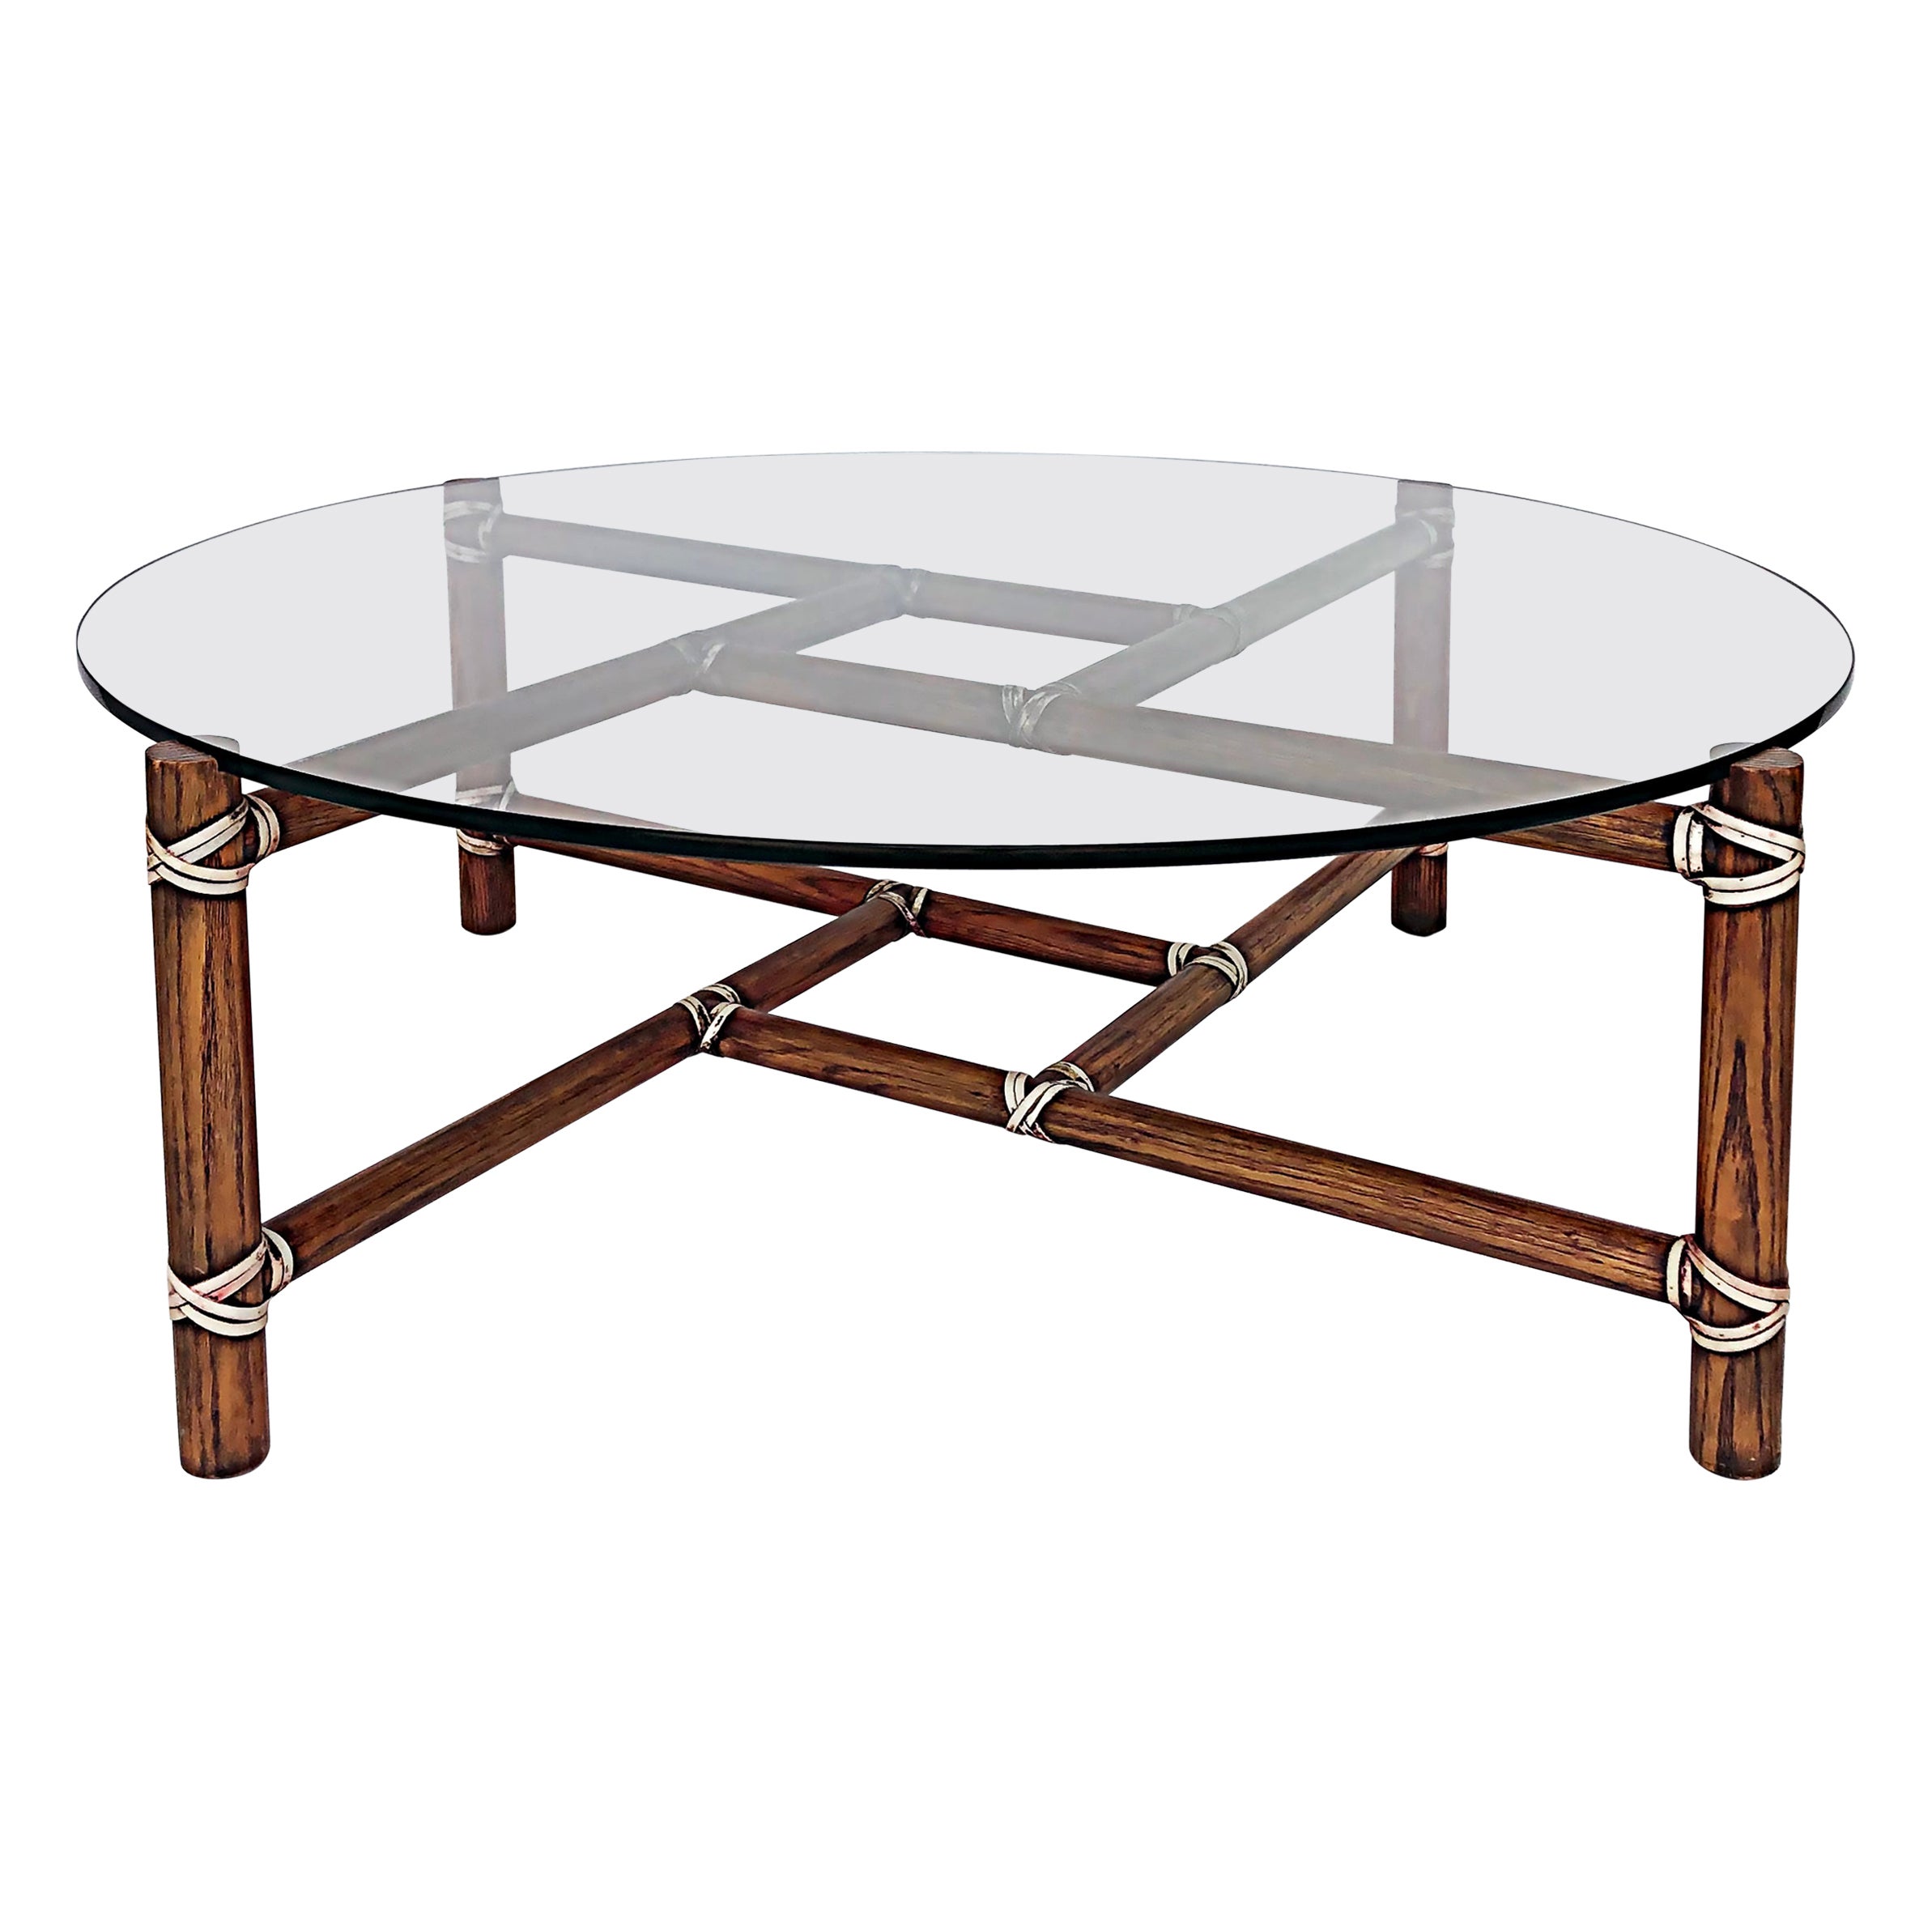 McGuire Funiture San Francisco Round Glass Top Coffee Table with Rawhide Straps